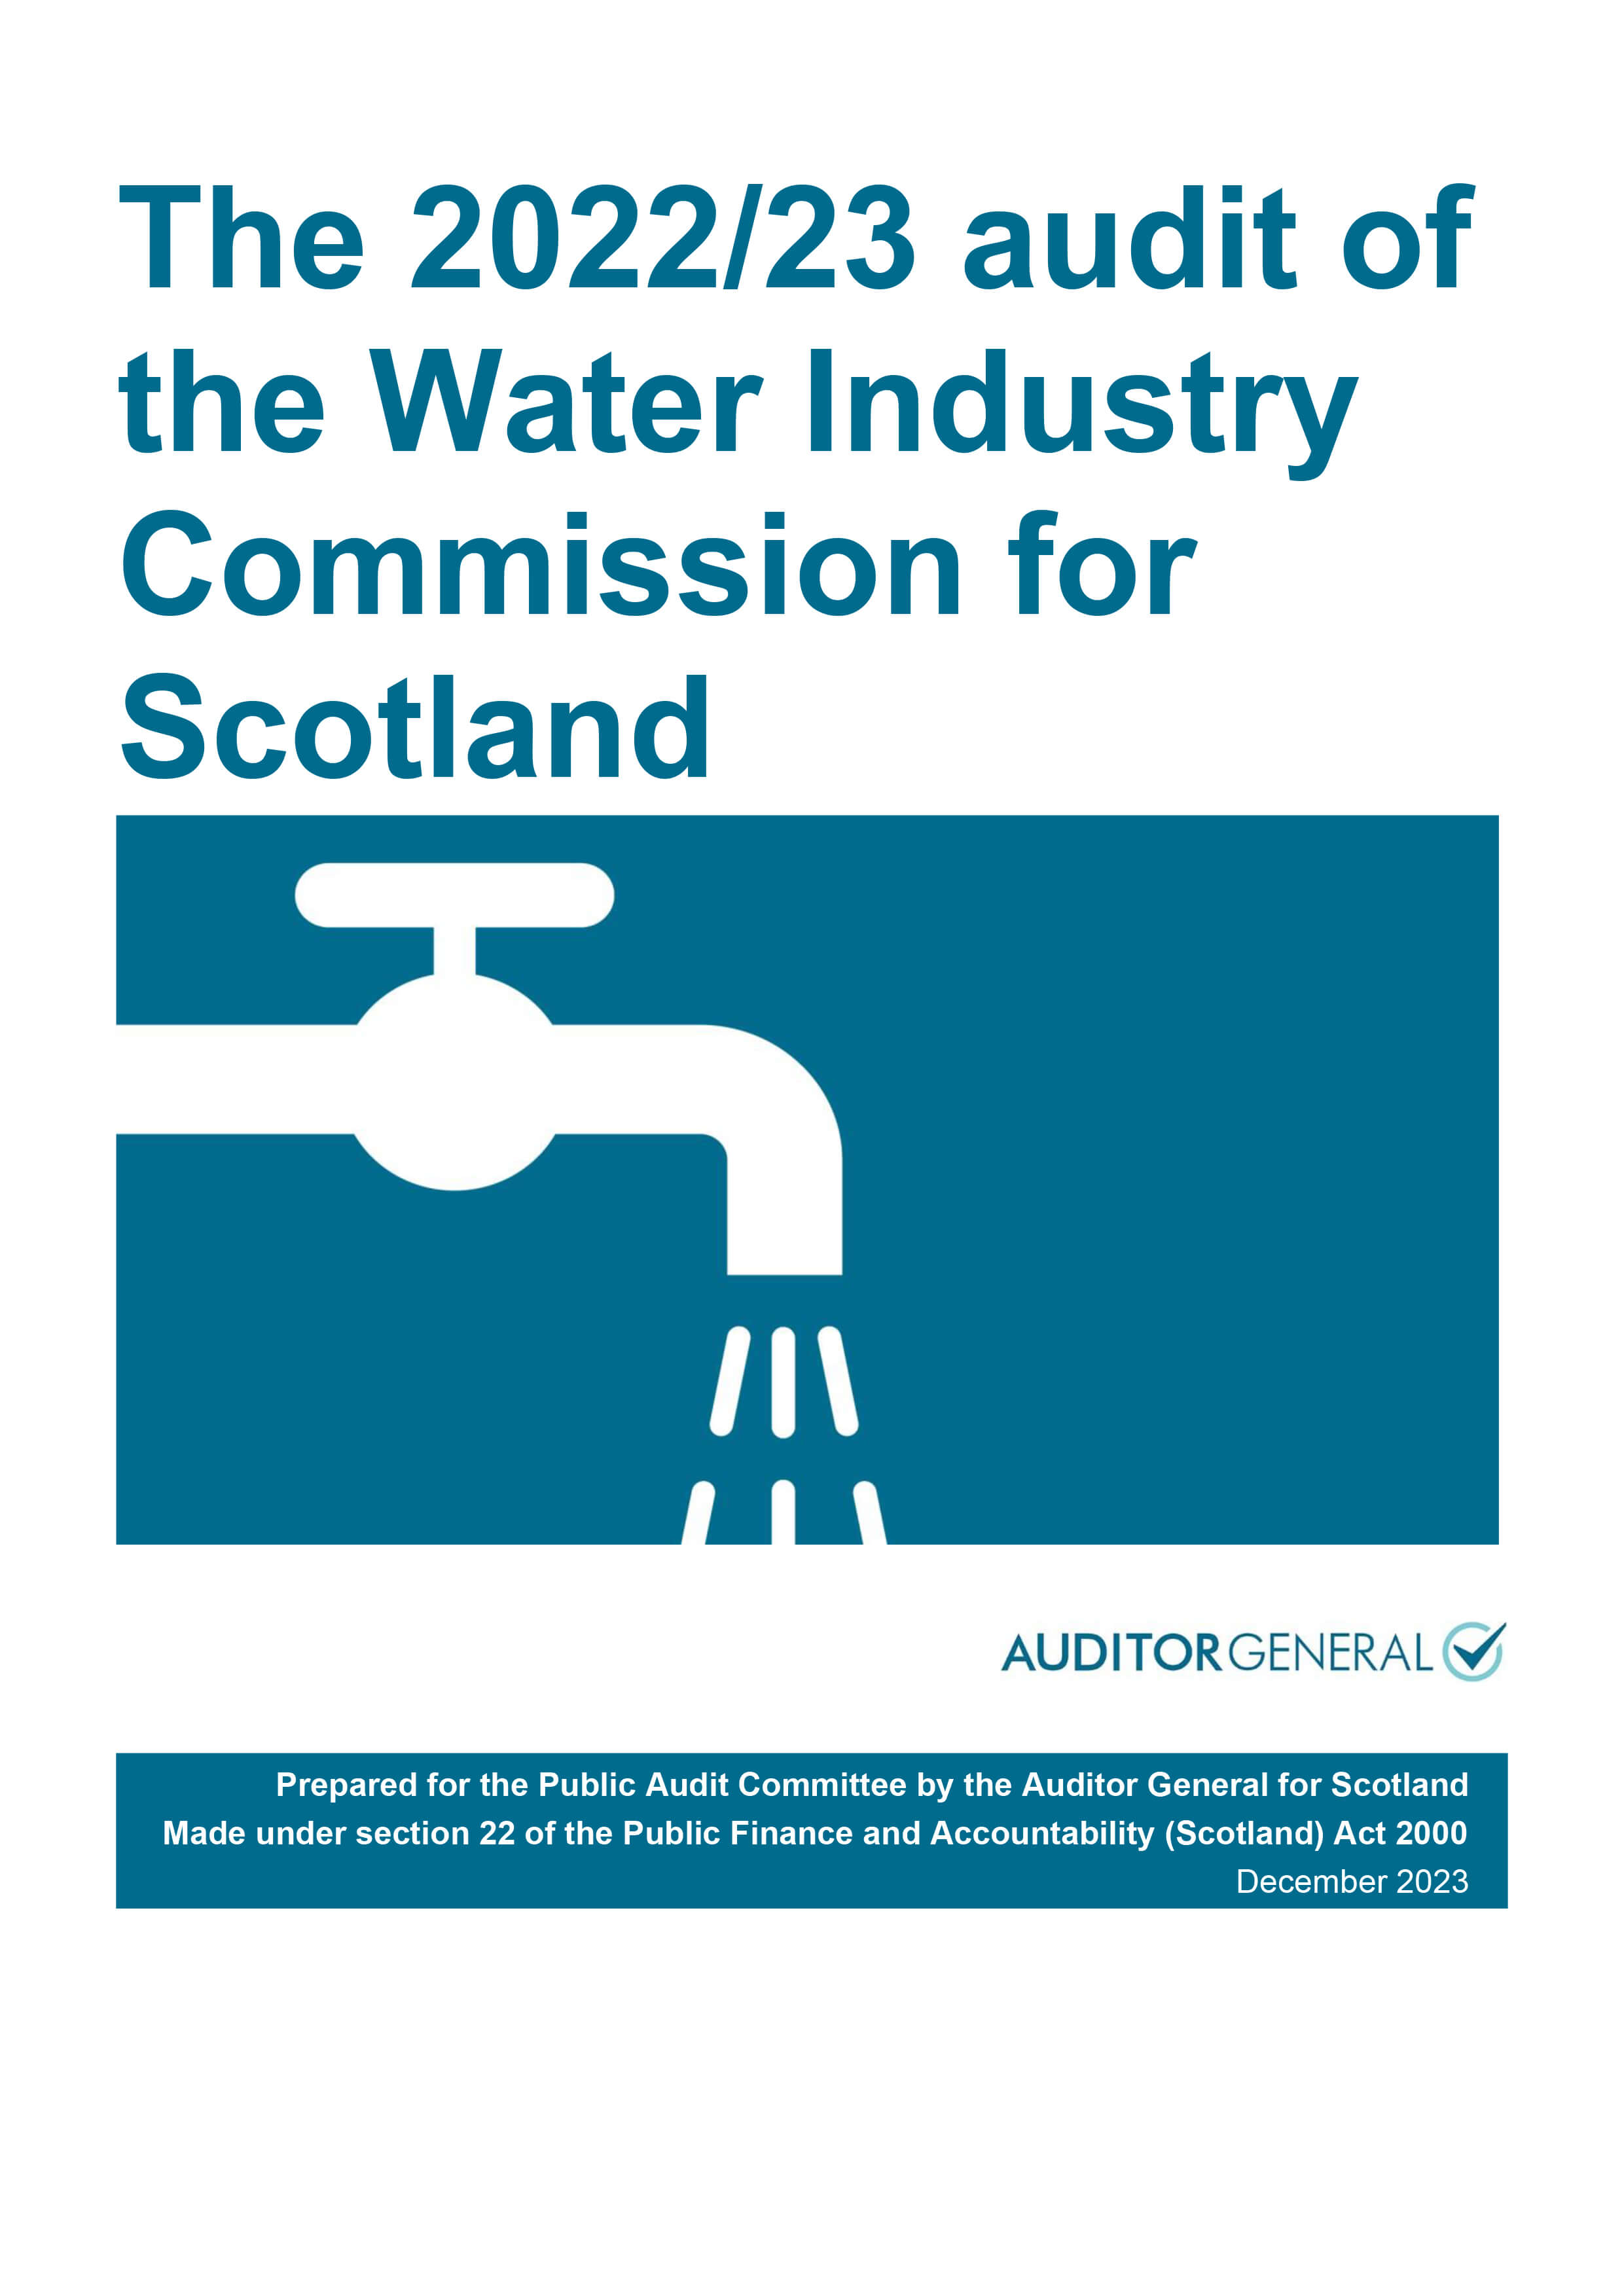 View The 2022/23 audit of the Water Industry Commission for Scotland